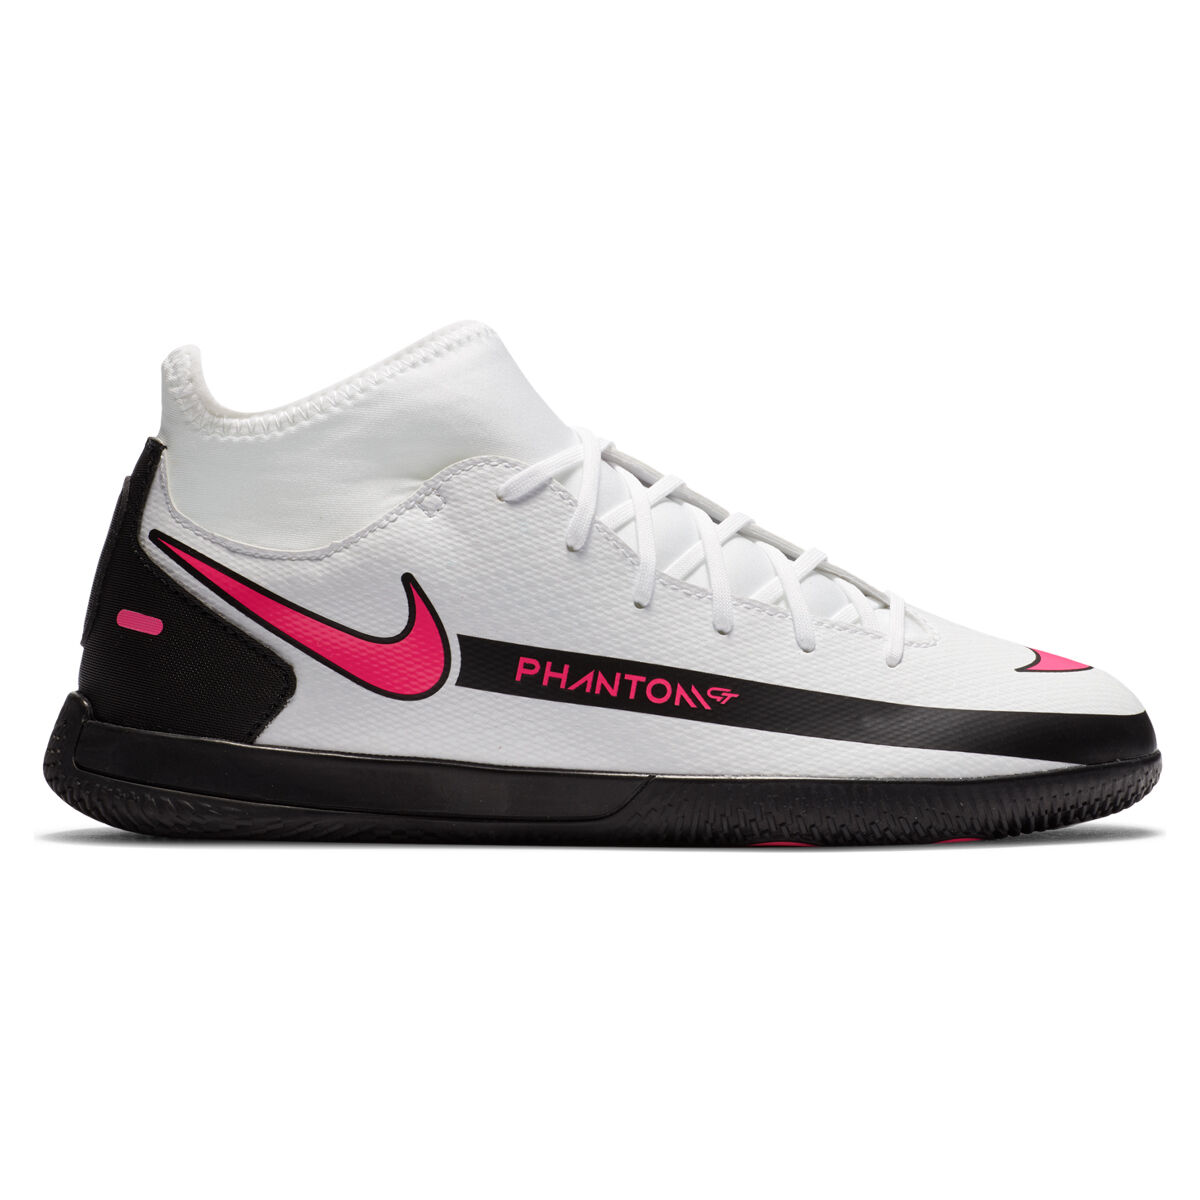 nike indoor soccer shoes cheap